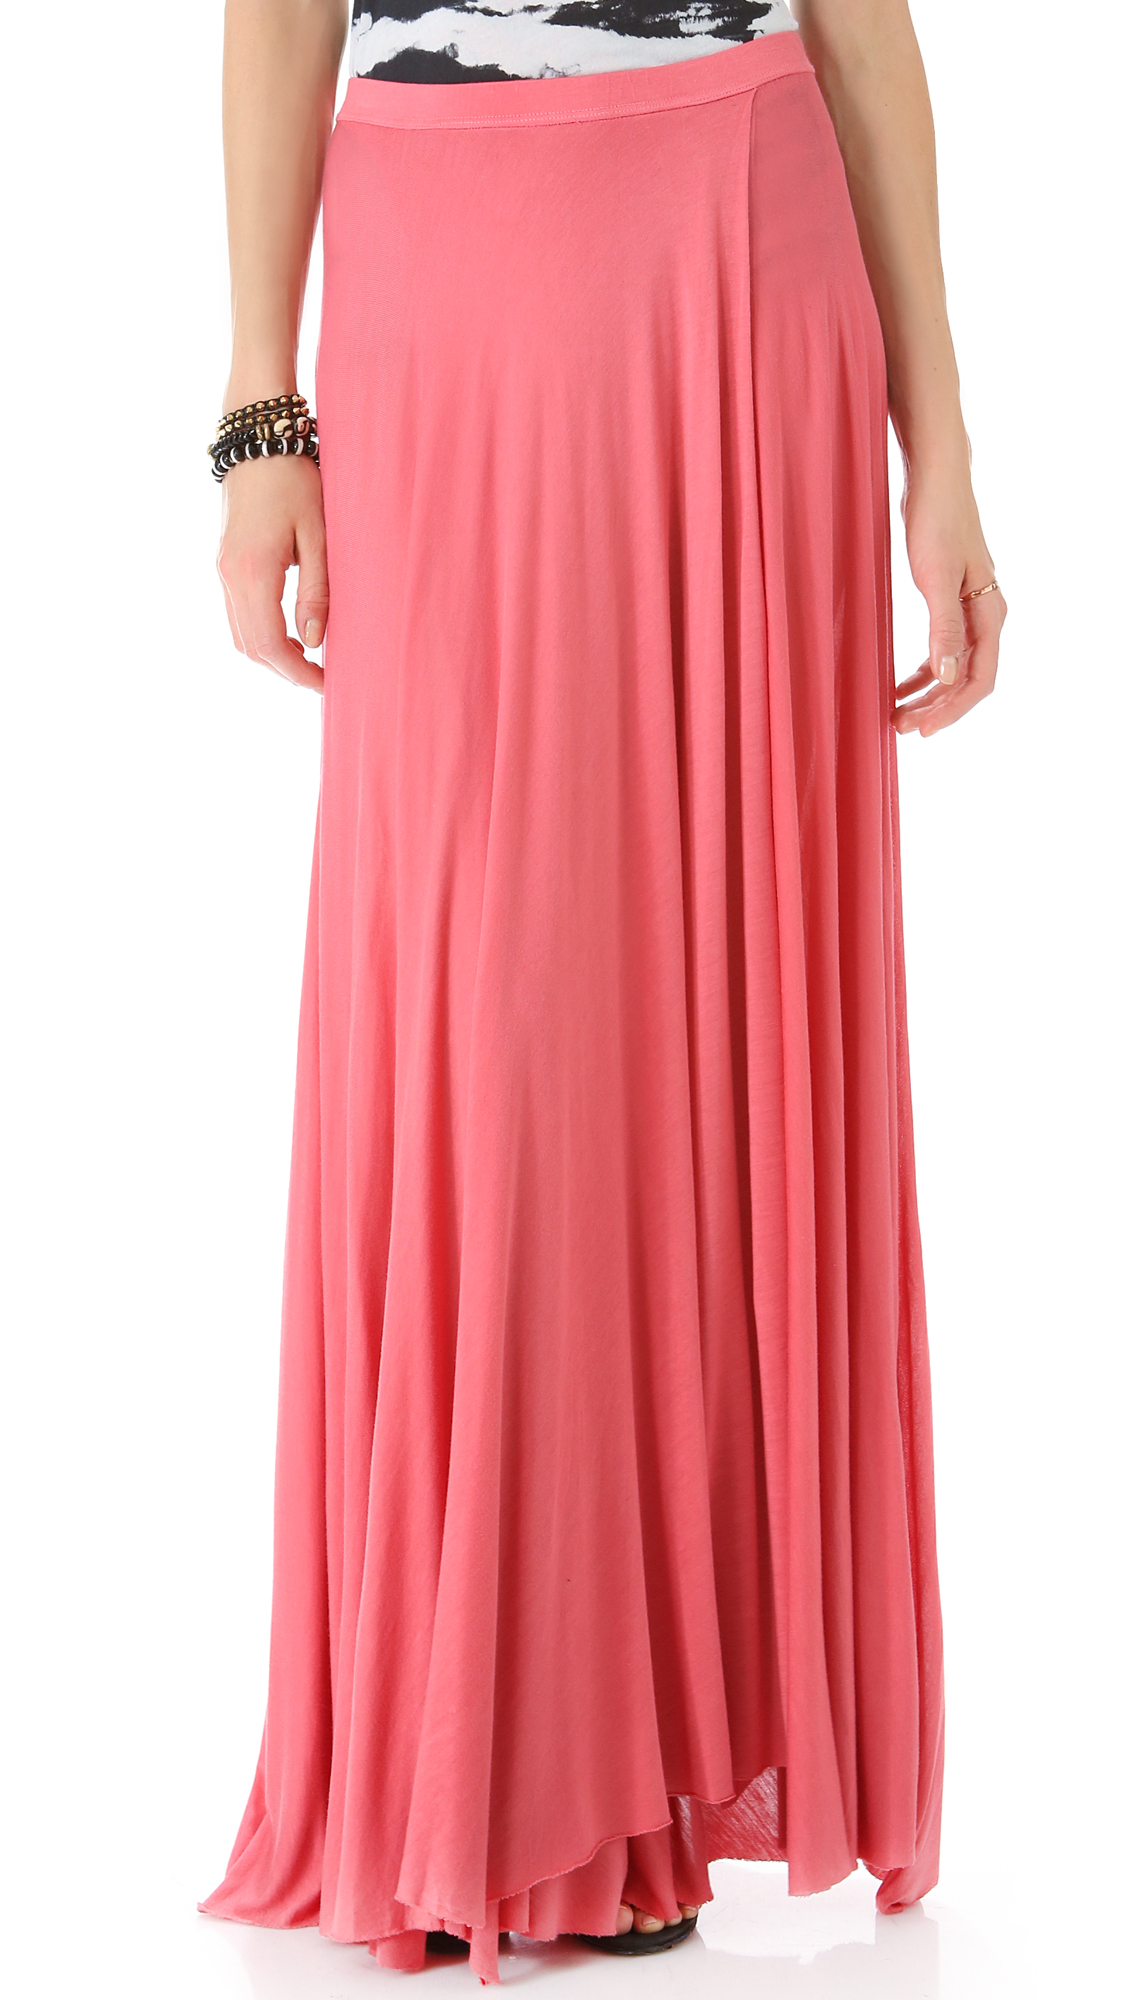 Enza Costa Full Circle Maxi Skirt in Pink (red) | Lyst